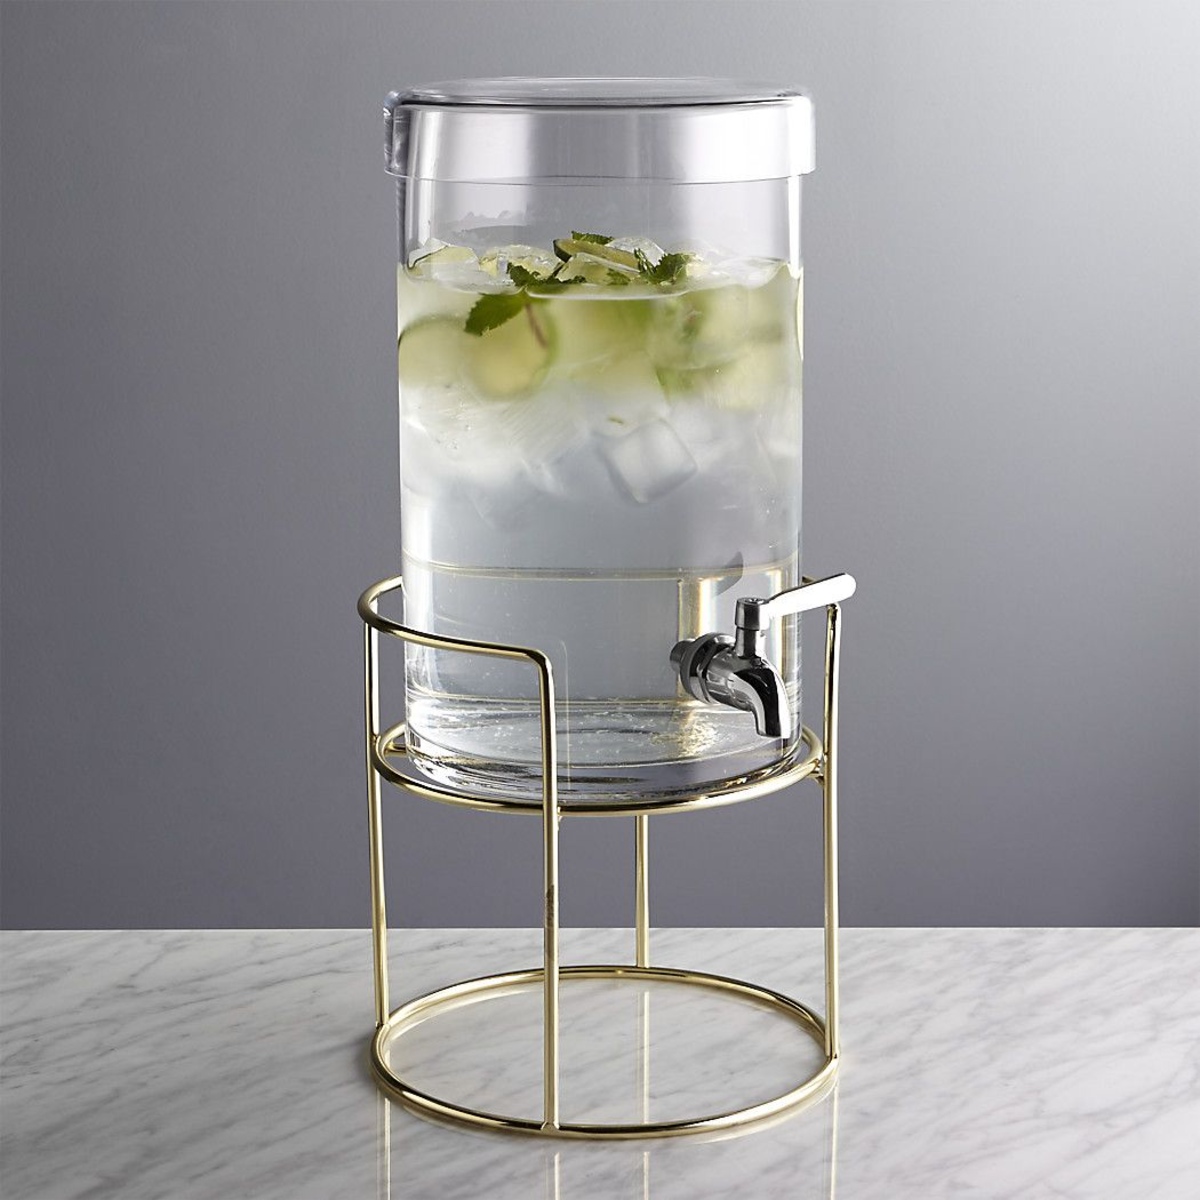 Classic Hostess Introduces Glass Infusion Beverage Dispenser For Summertime  Drink and Outdoor Party -- classic hostess